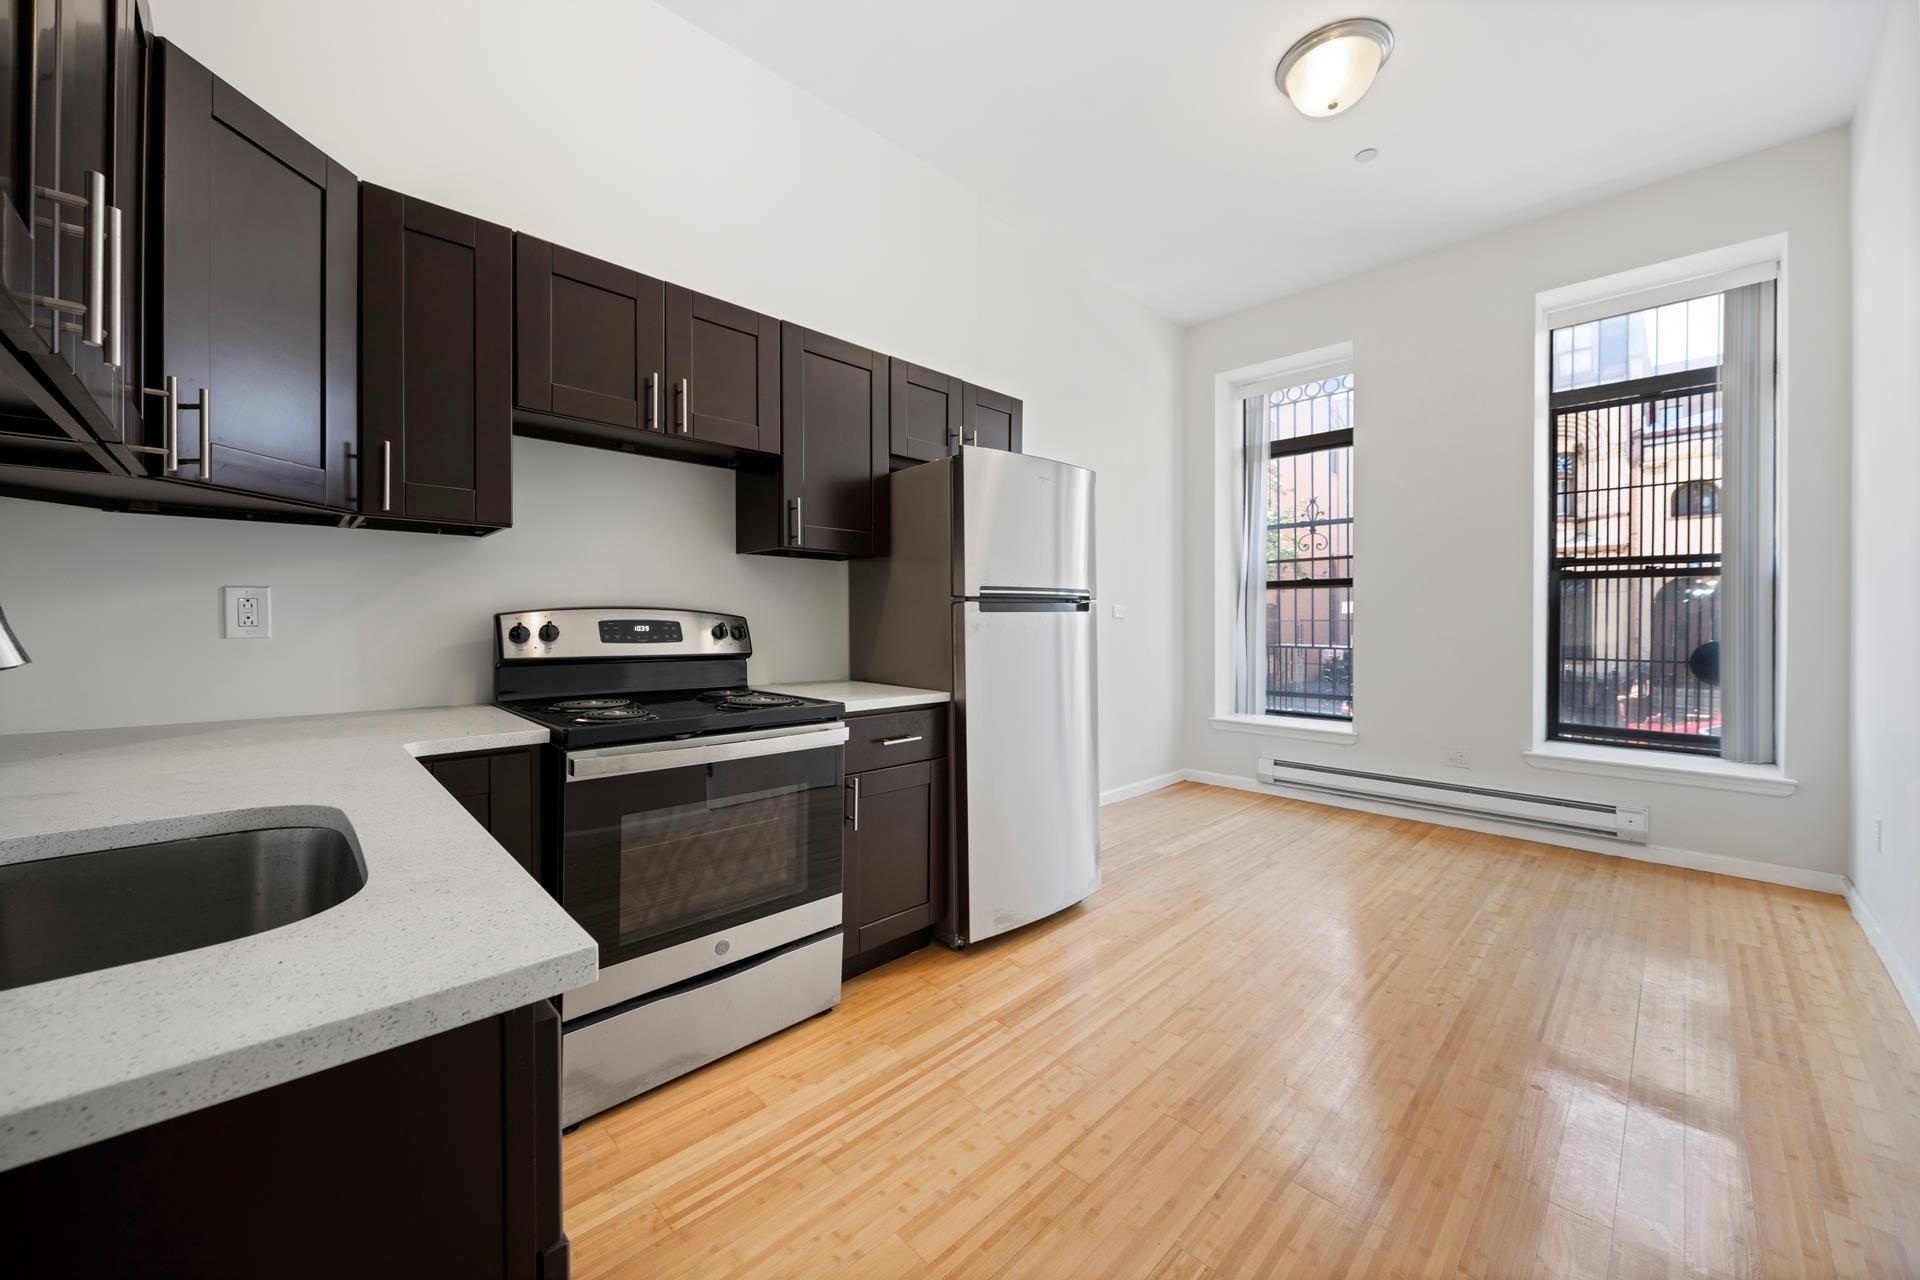 2. Rentals at 75 W 126TH ST, 1 New York